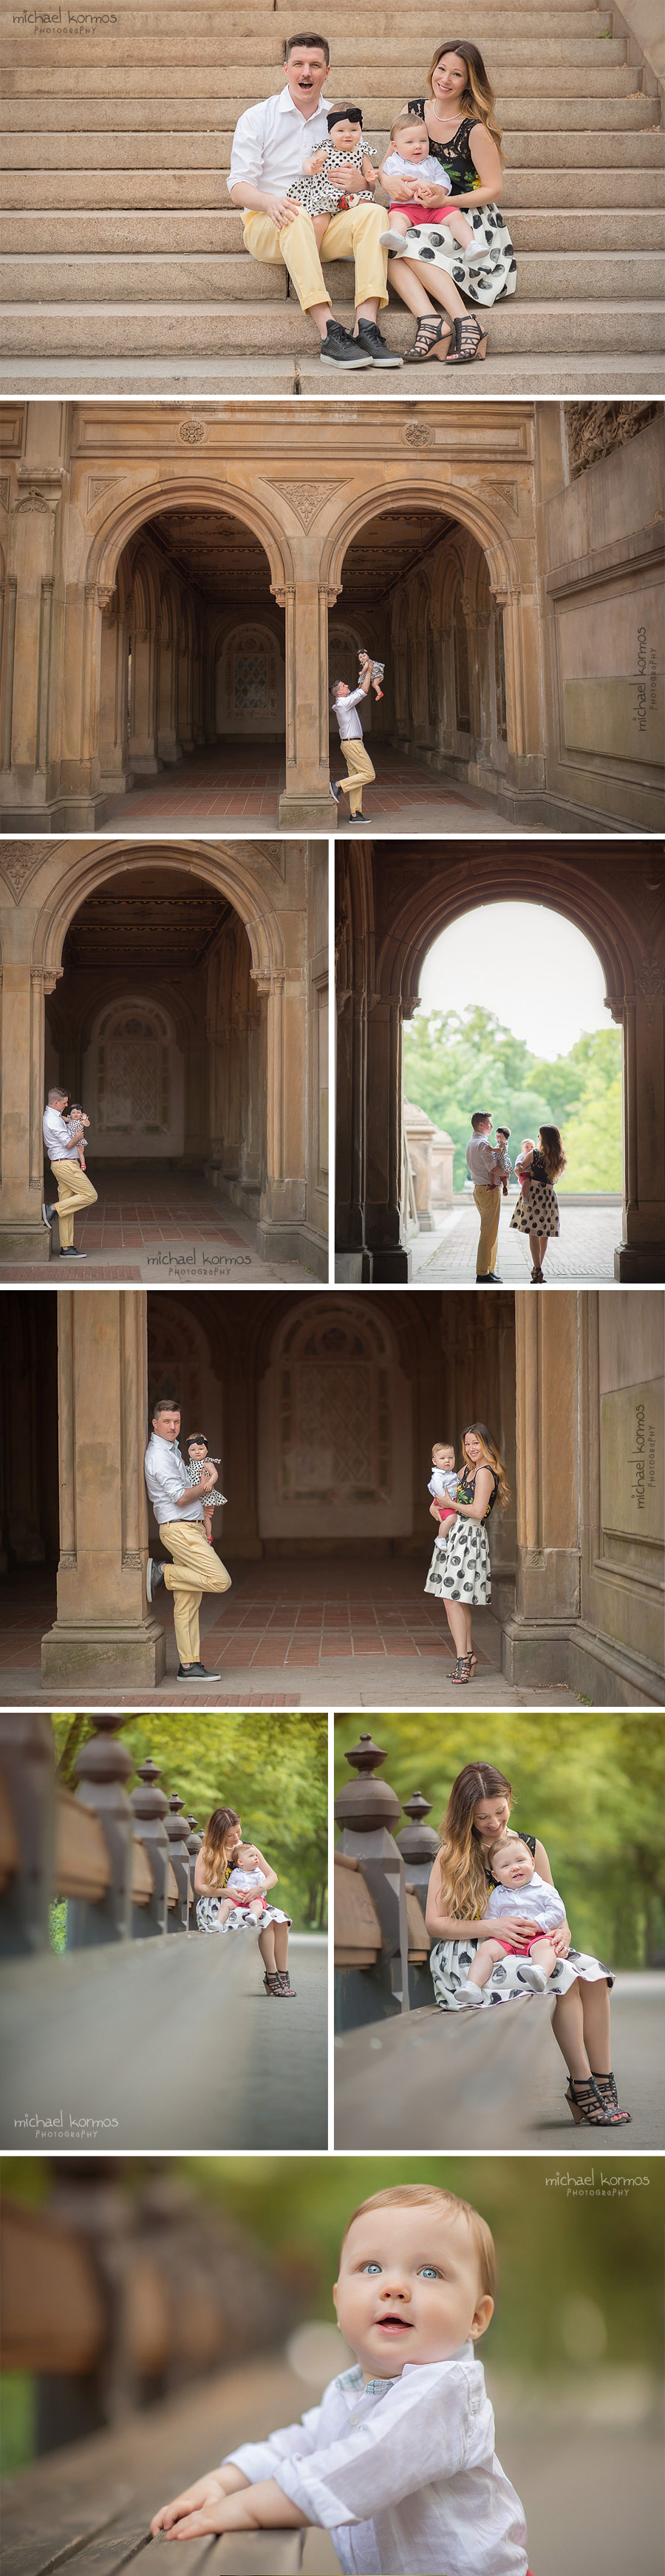 Central Park lifestyle family photo shoot